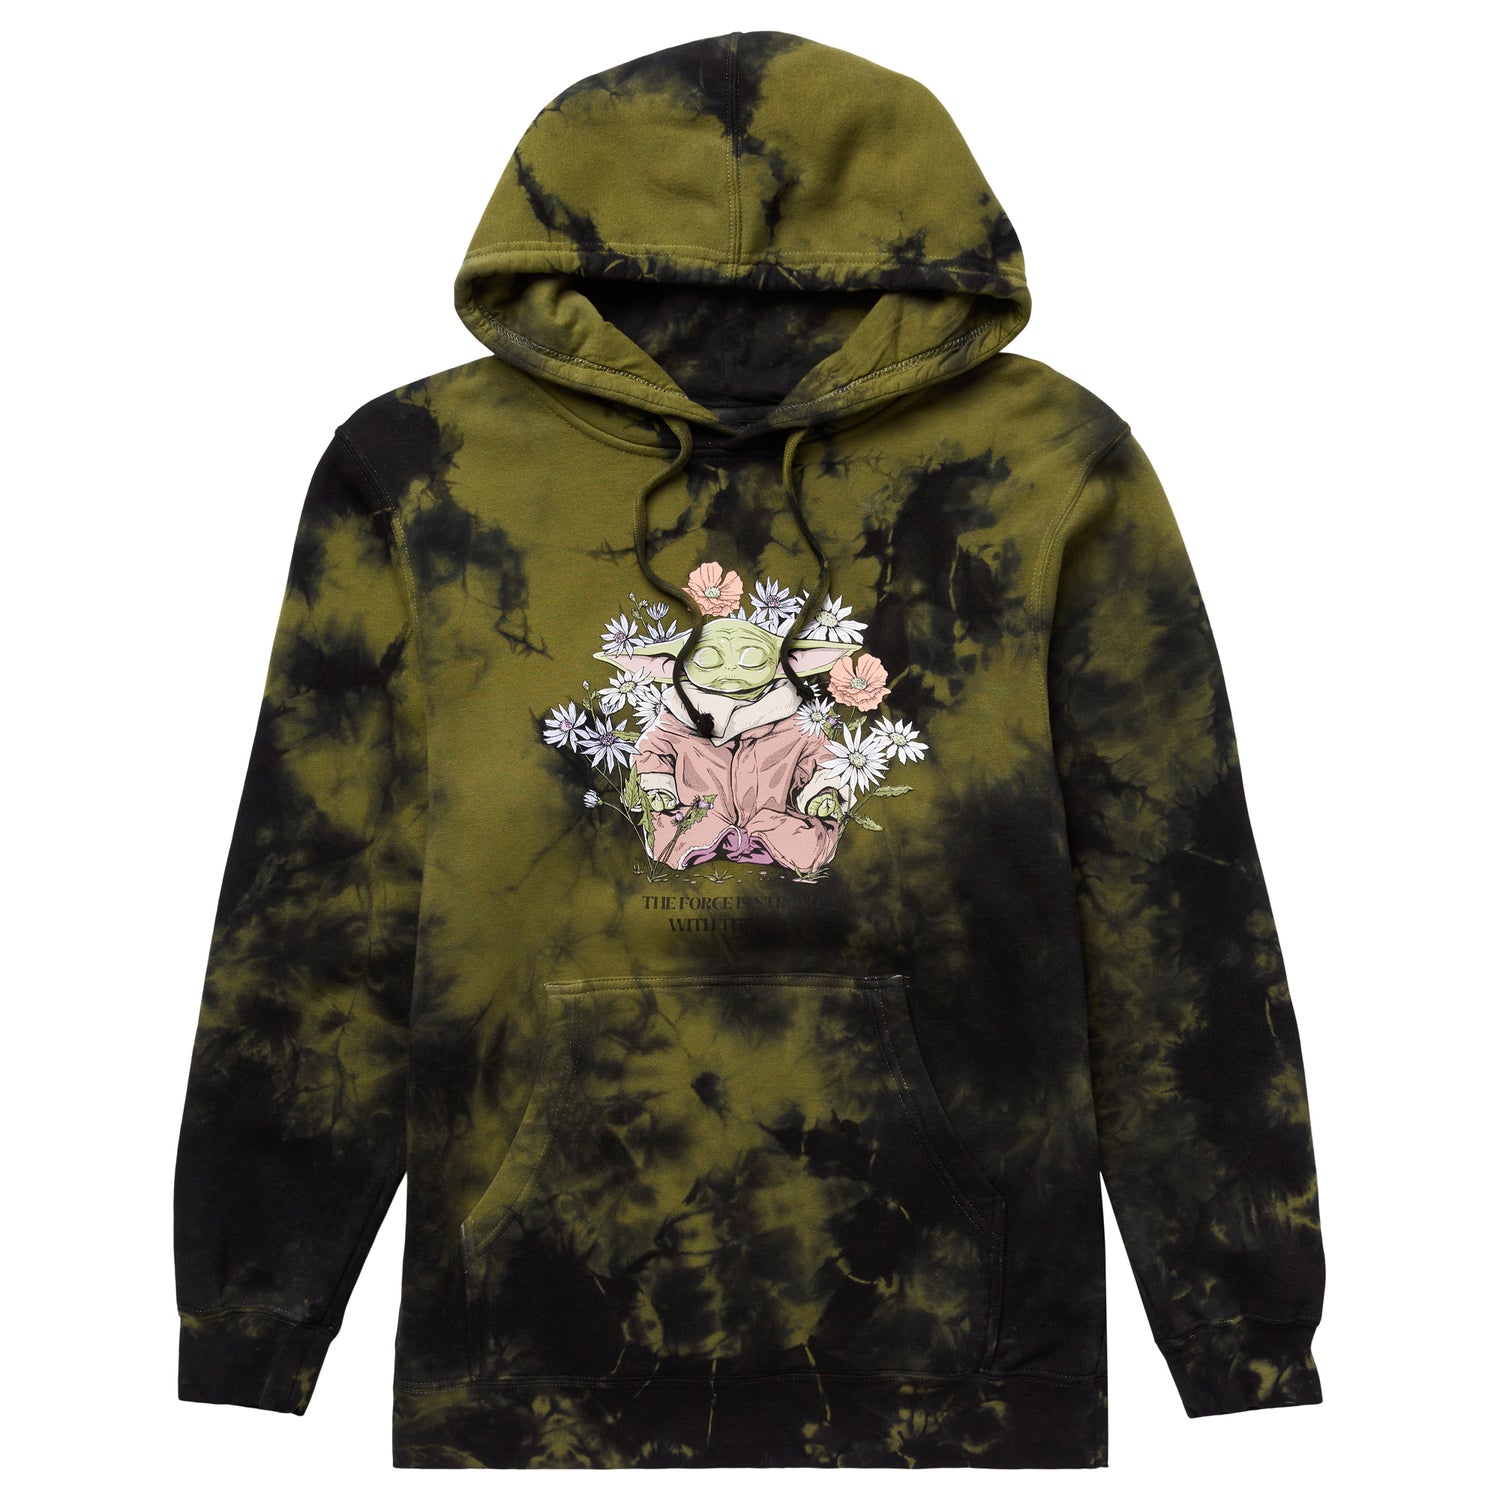 STAR WARS THE FORCE PULLOVER HOODIE - GREEN WASH